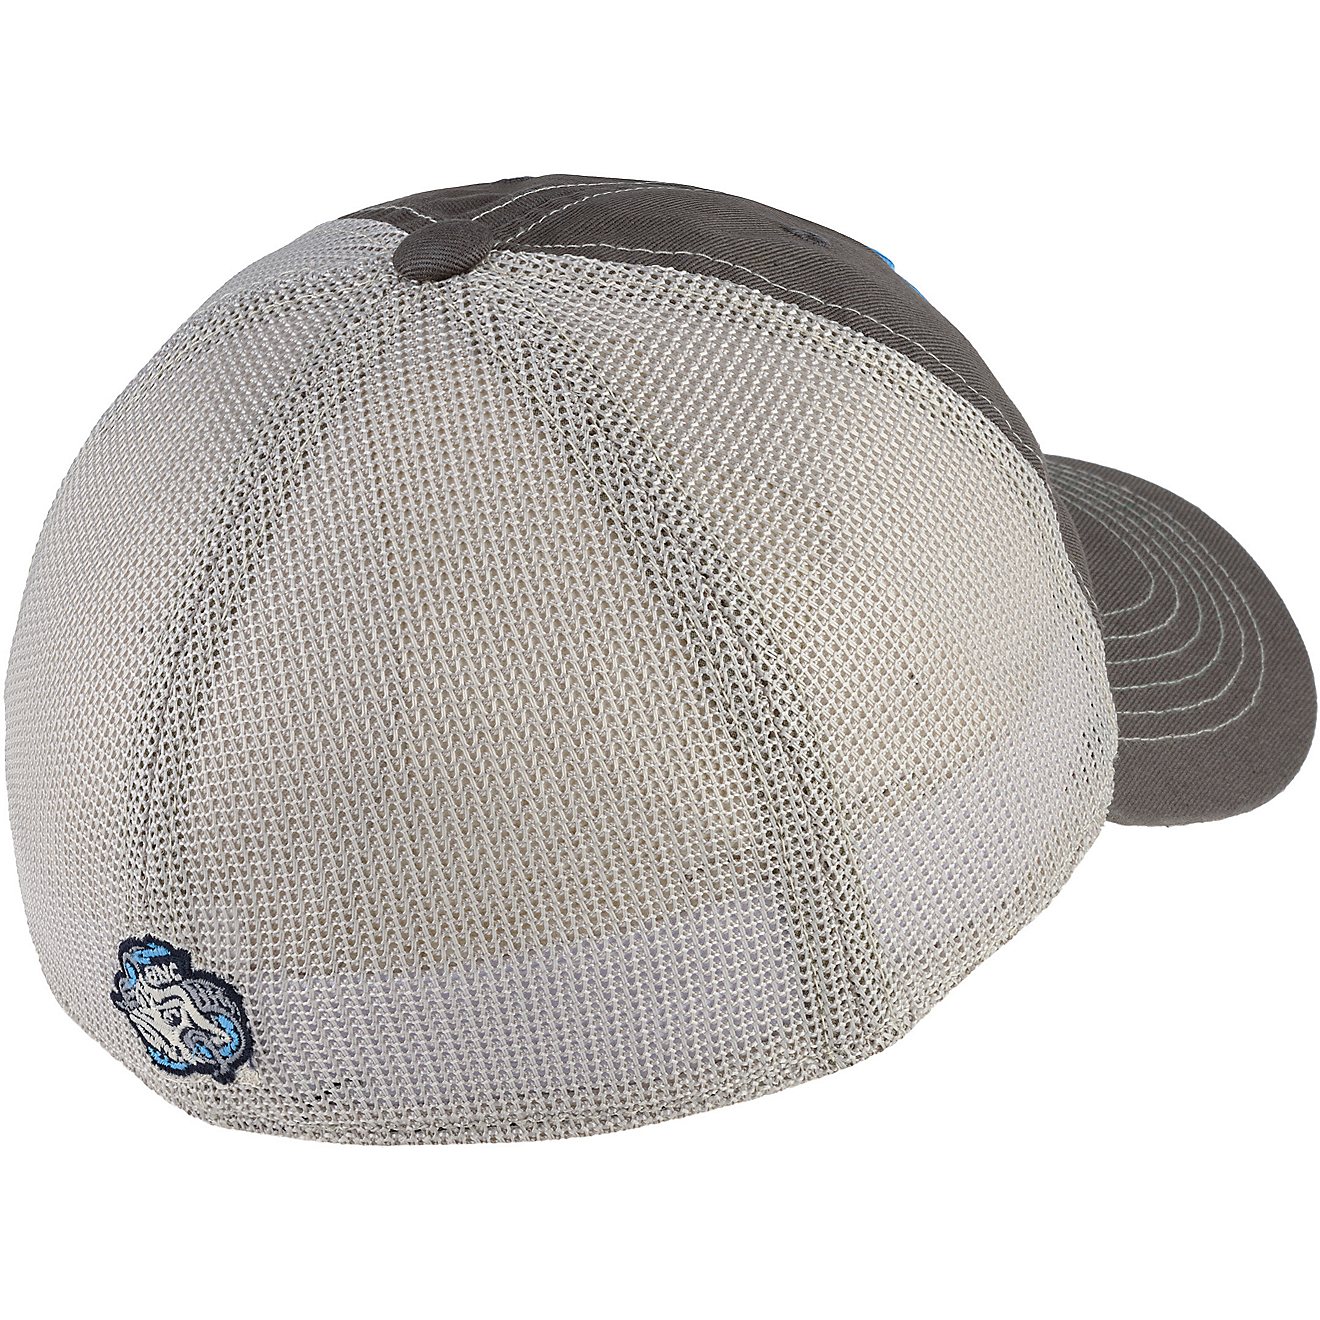 Top of the World Men's University of North Carolina Putty Cap                                                                    - view number 2